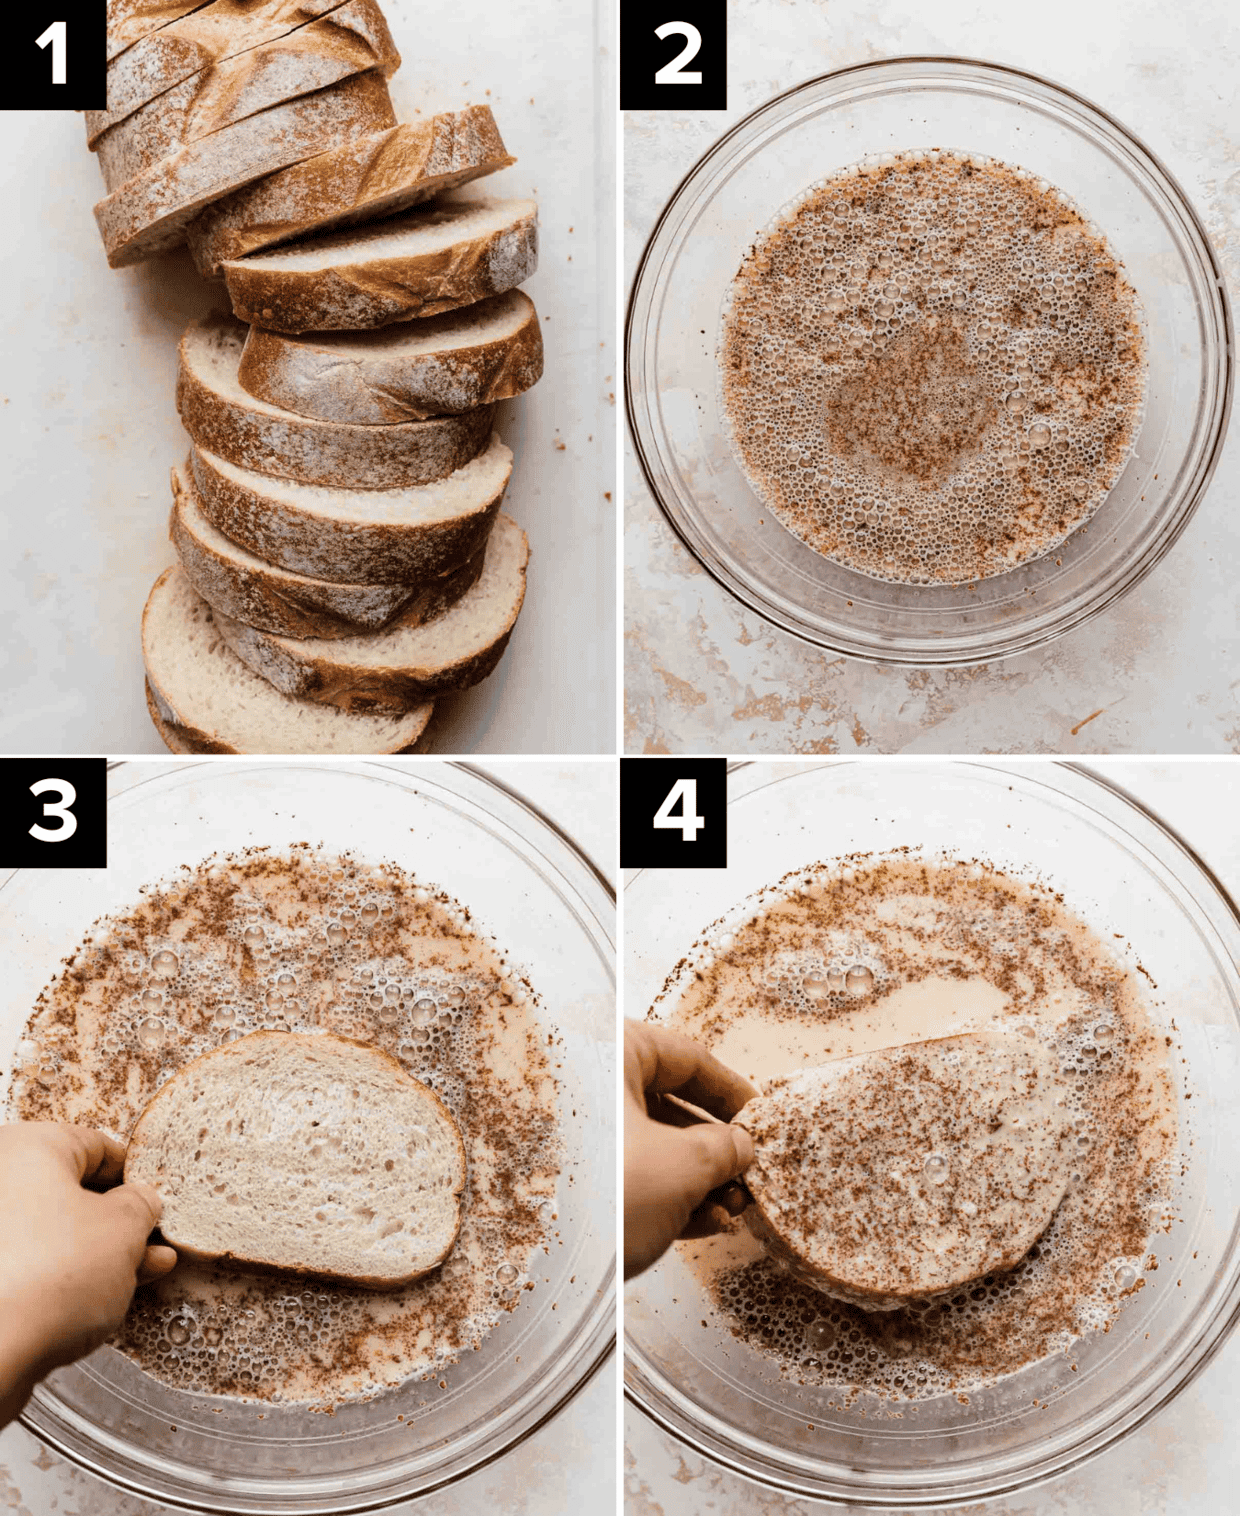 Four images showing how to make the best French toast with French bread, top left image is French bread sliced, top right is cinnamon French toast egg batter in glass bowl, bottom left image is slice of bread dipped into bread mixture, and bottom right is the other side of bread dipped into egg mixture.